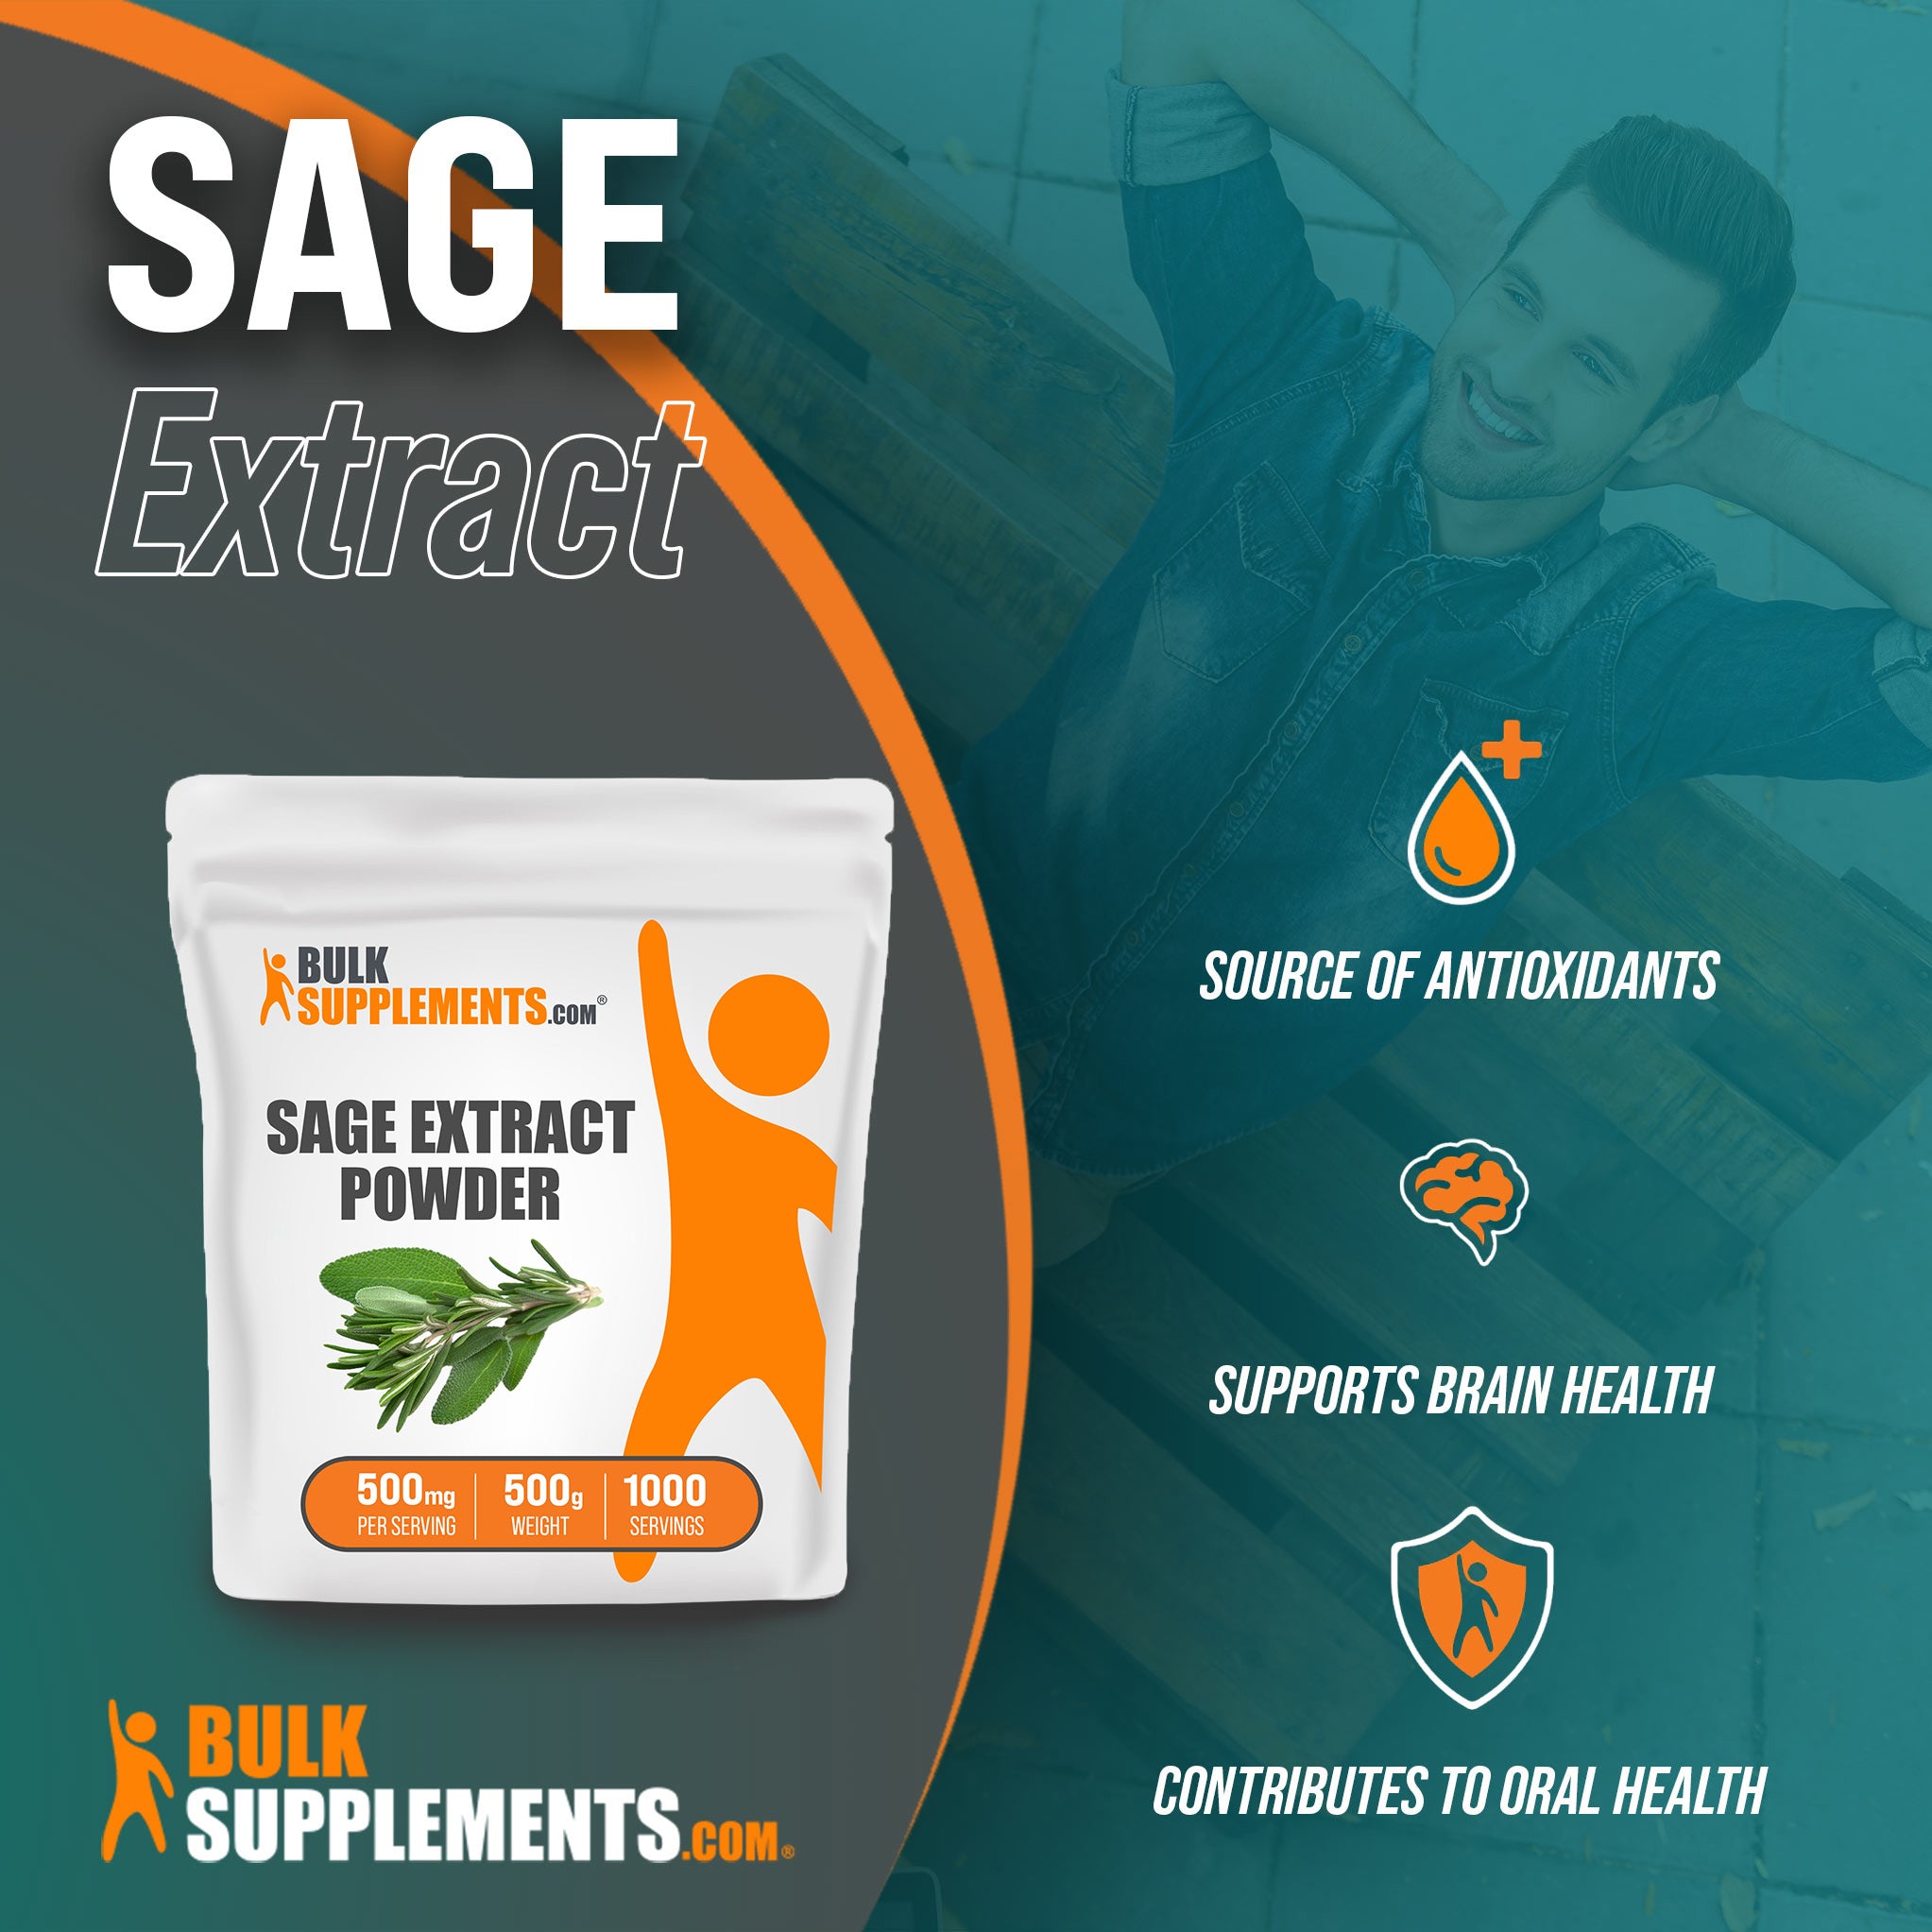 Benefits of Sage Extract: Source of antioxidants, supports brain health, contributes to oral health